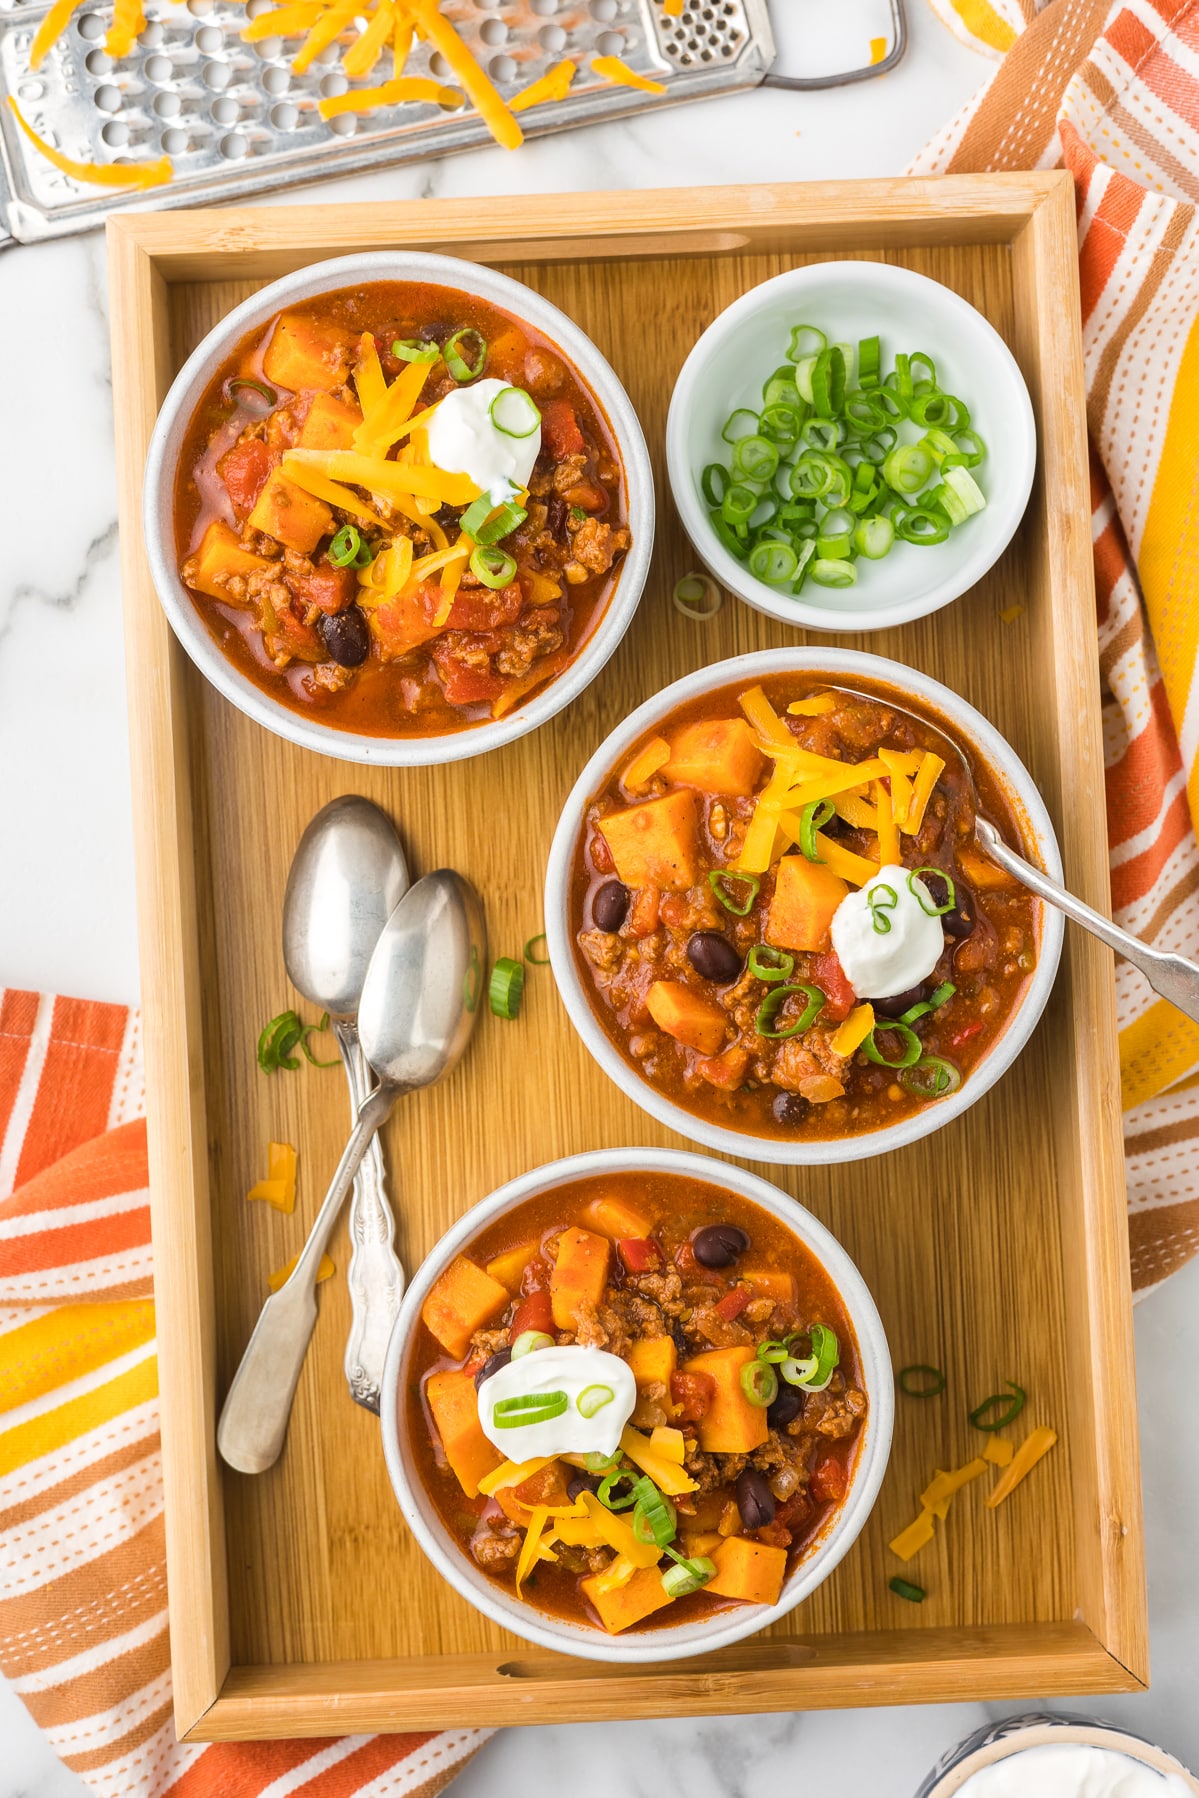 Three bowls of chili with toppings.